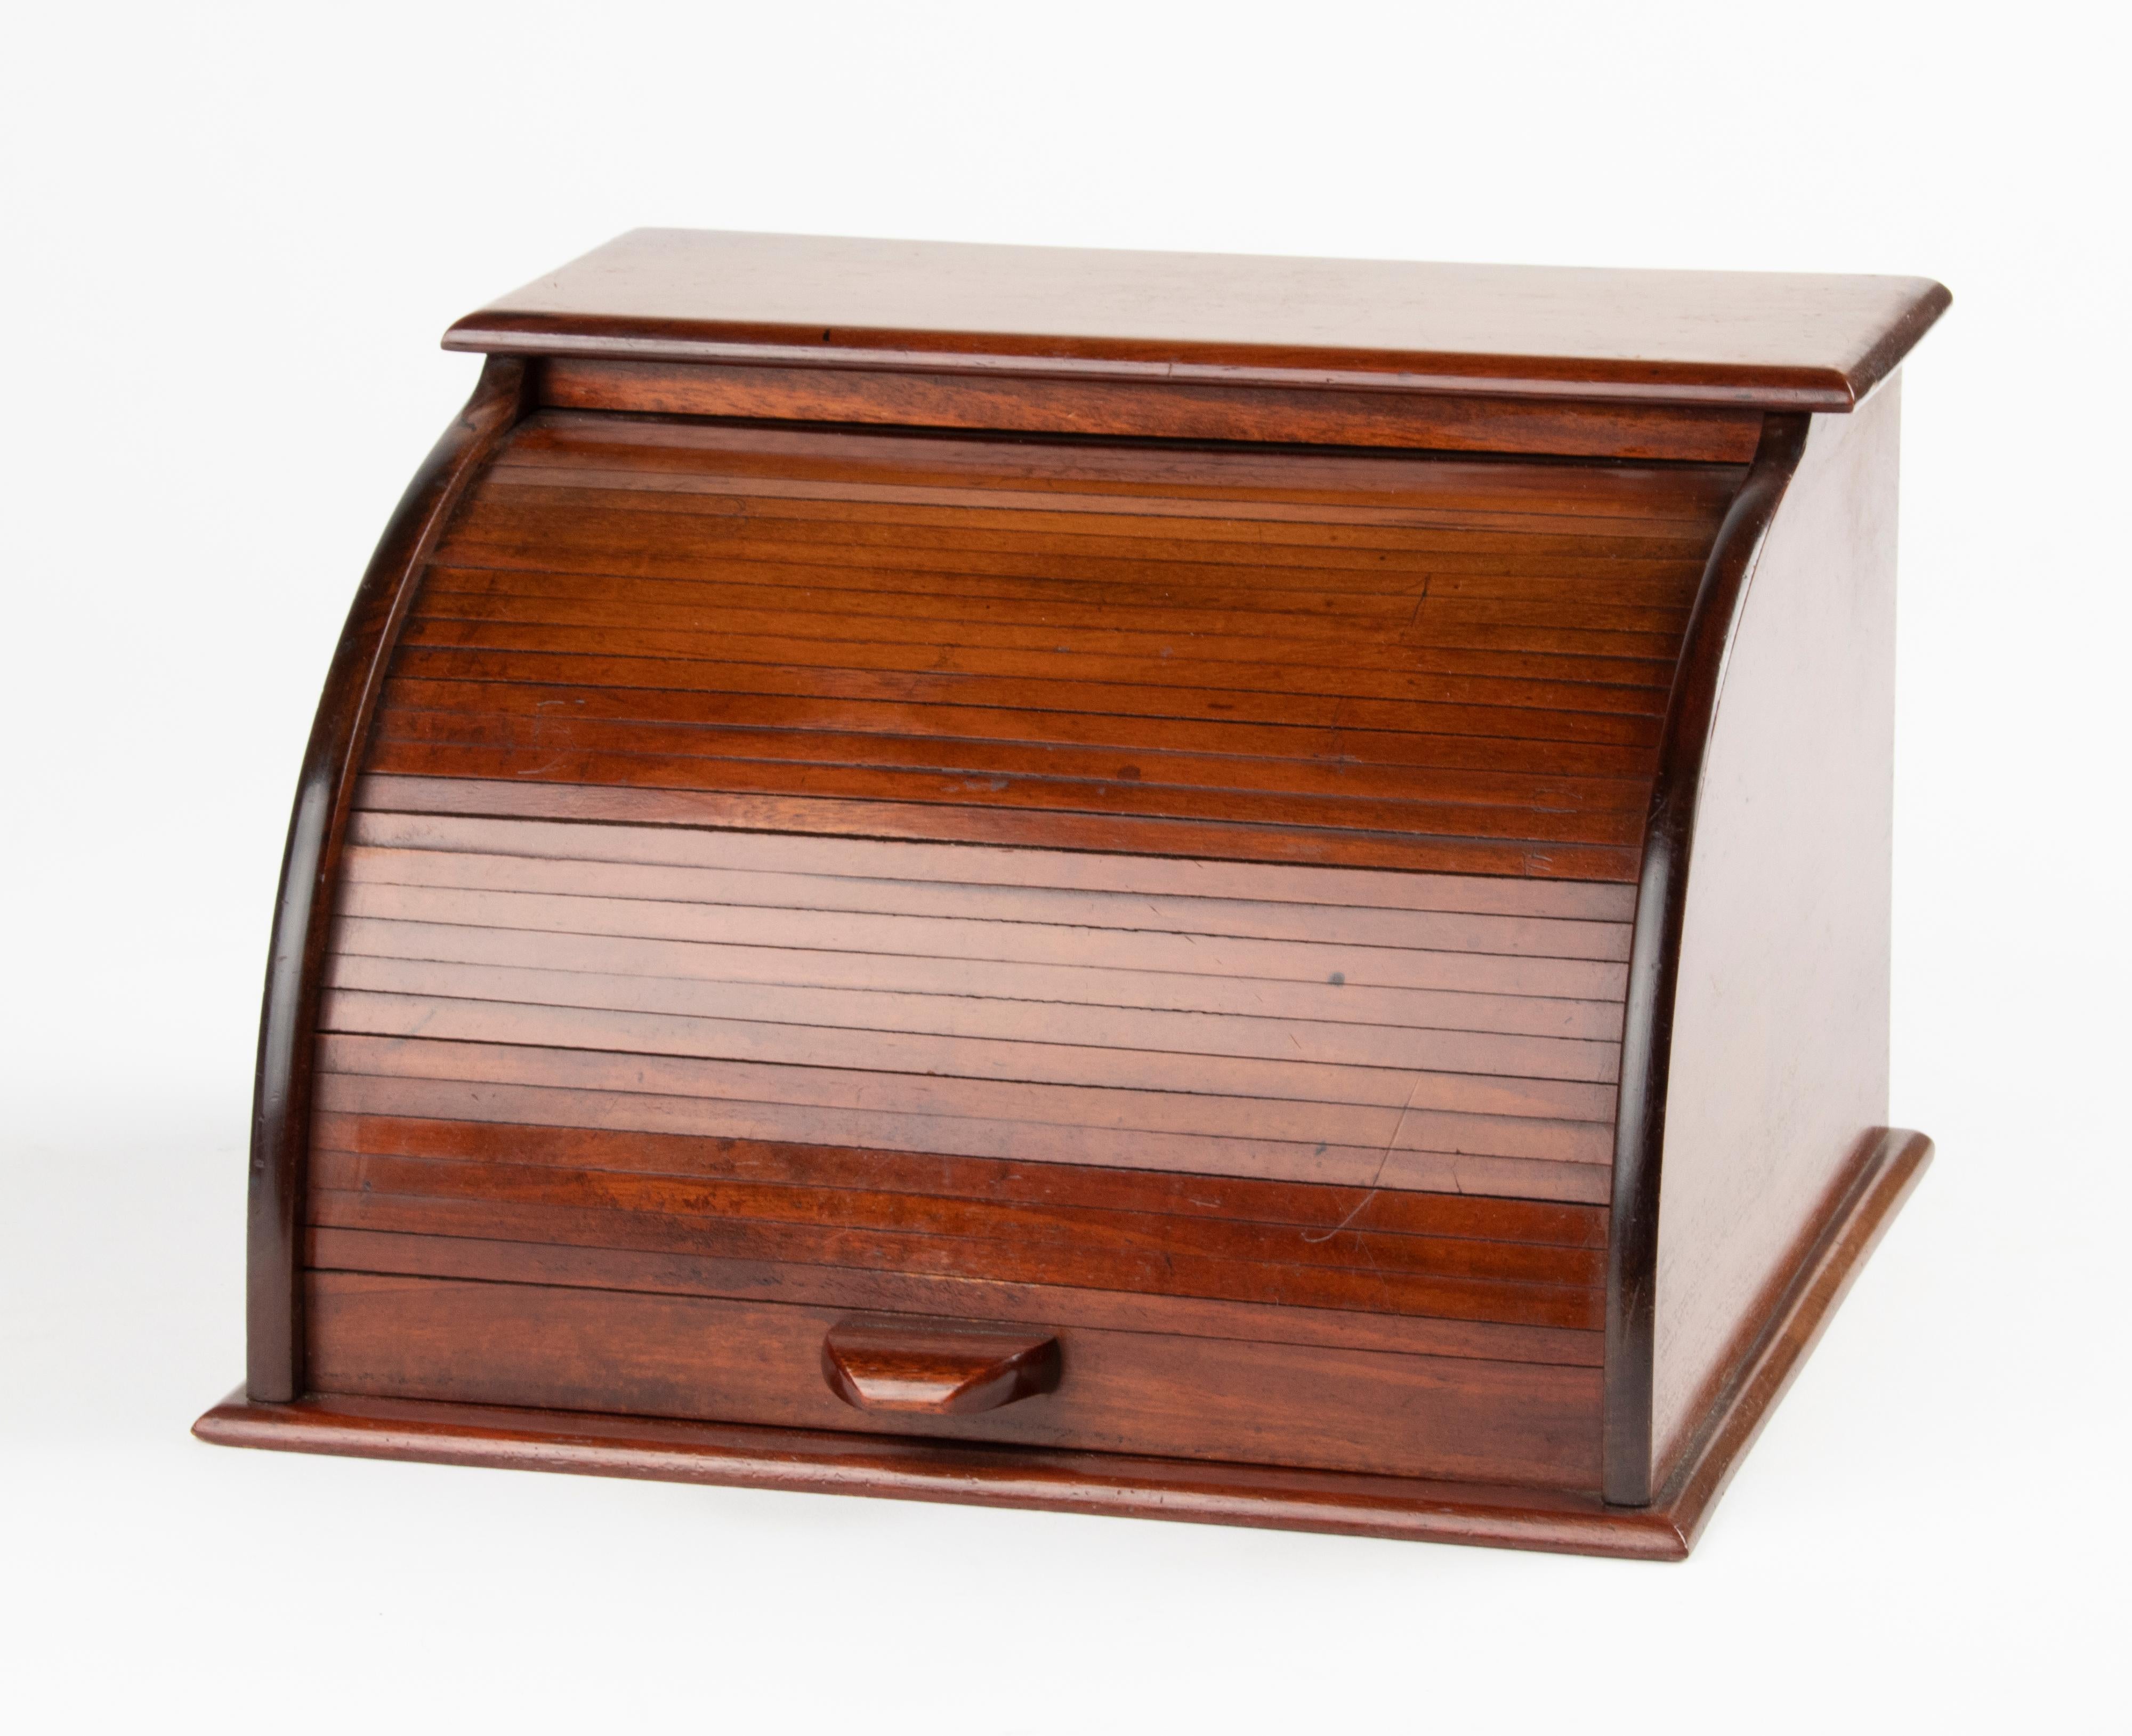 Beautiful antique box for letters / documents with a roller shutter door. The box is made of wood. In good condition, the tambour door opens smoothly. Made in France, circa 1880-1890.